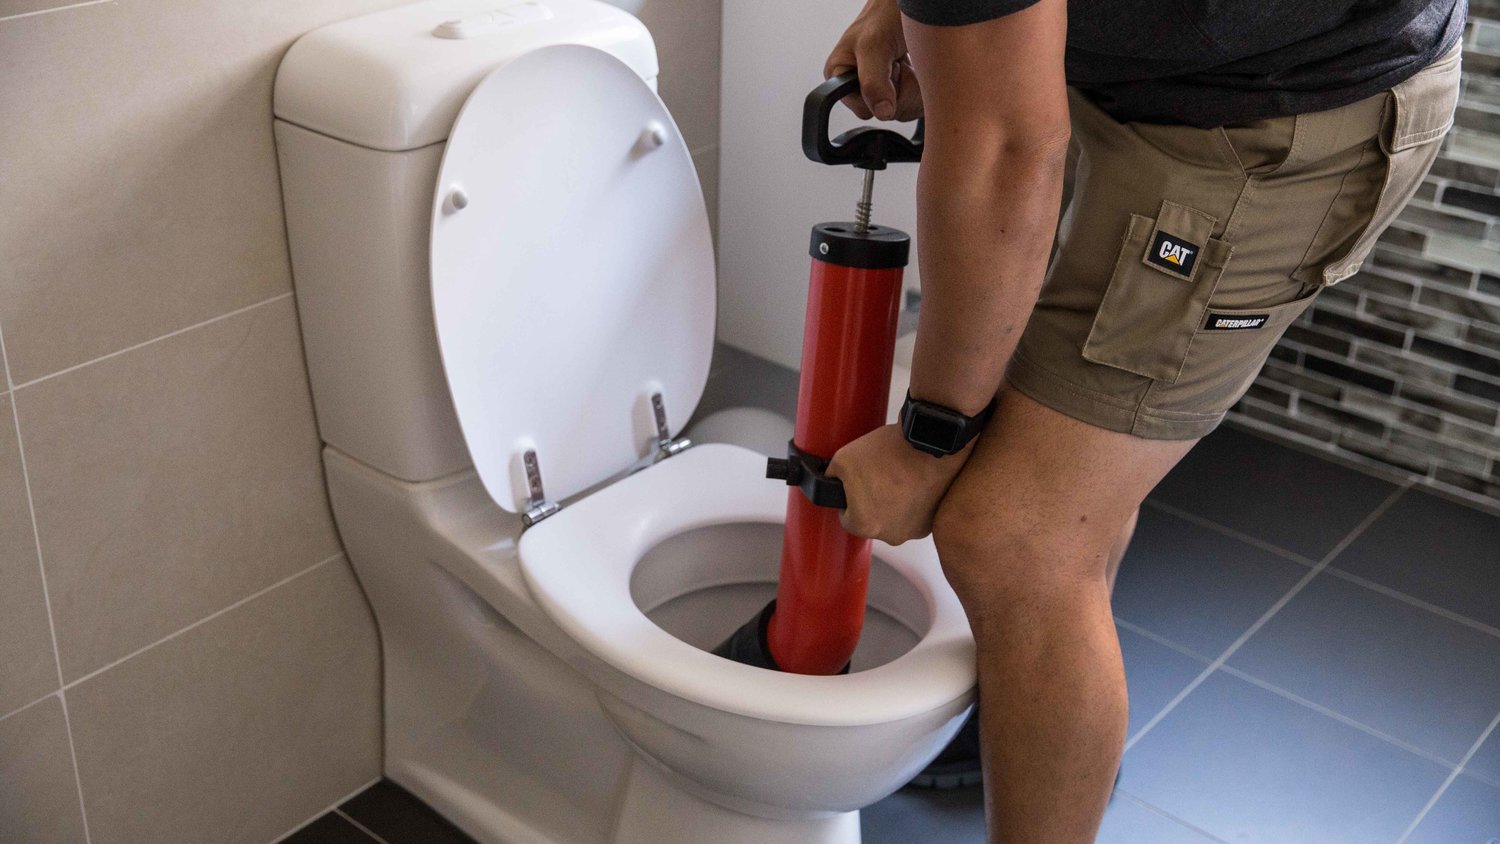 A man providing plumbing service in a city, fixing a toilet with a red hose.